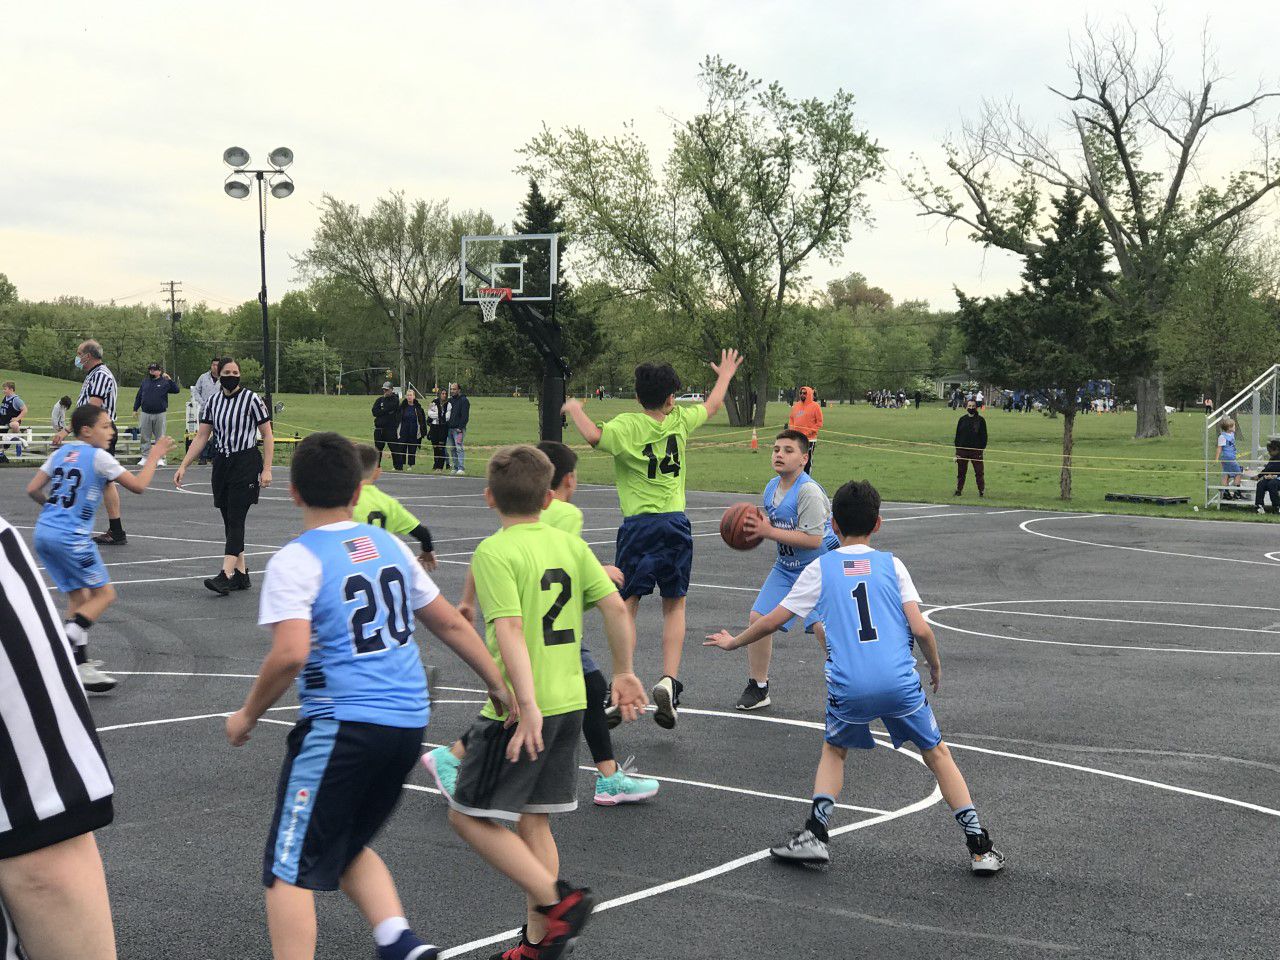 Except for the wind and some rain, the CYO outdoor hoops league has been a slam dunk